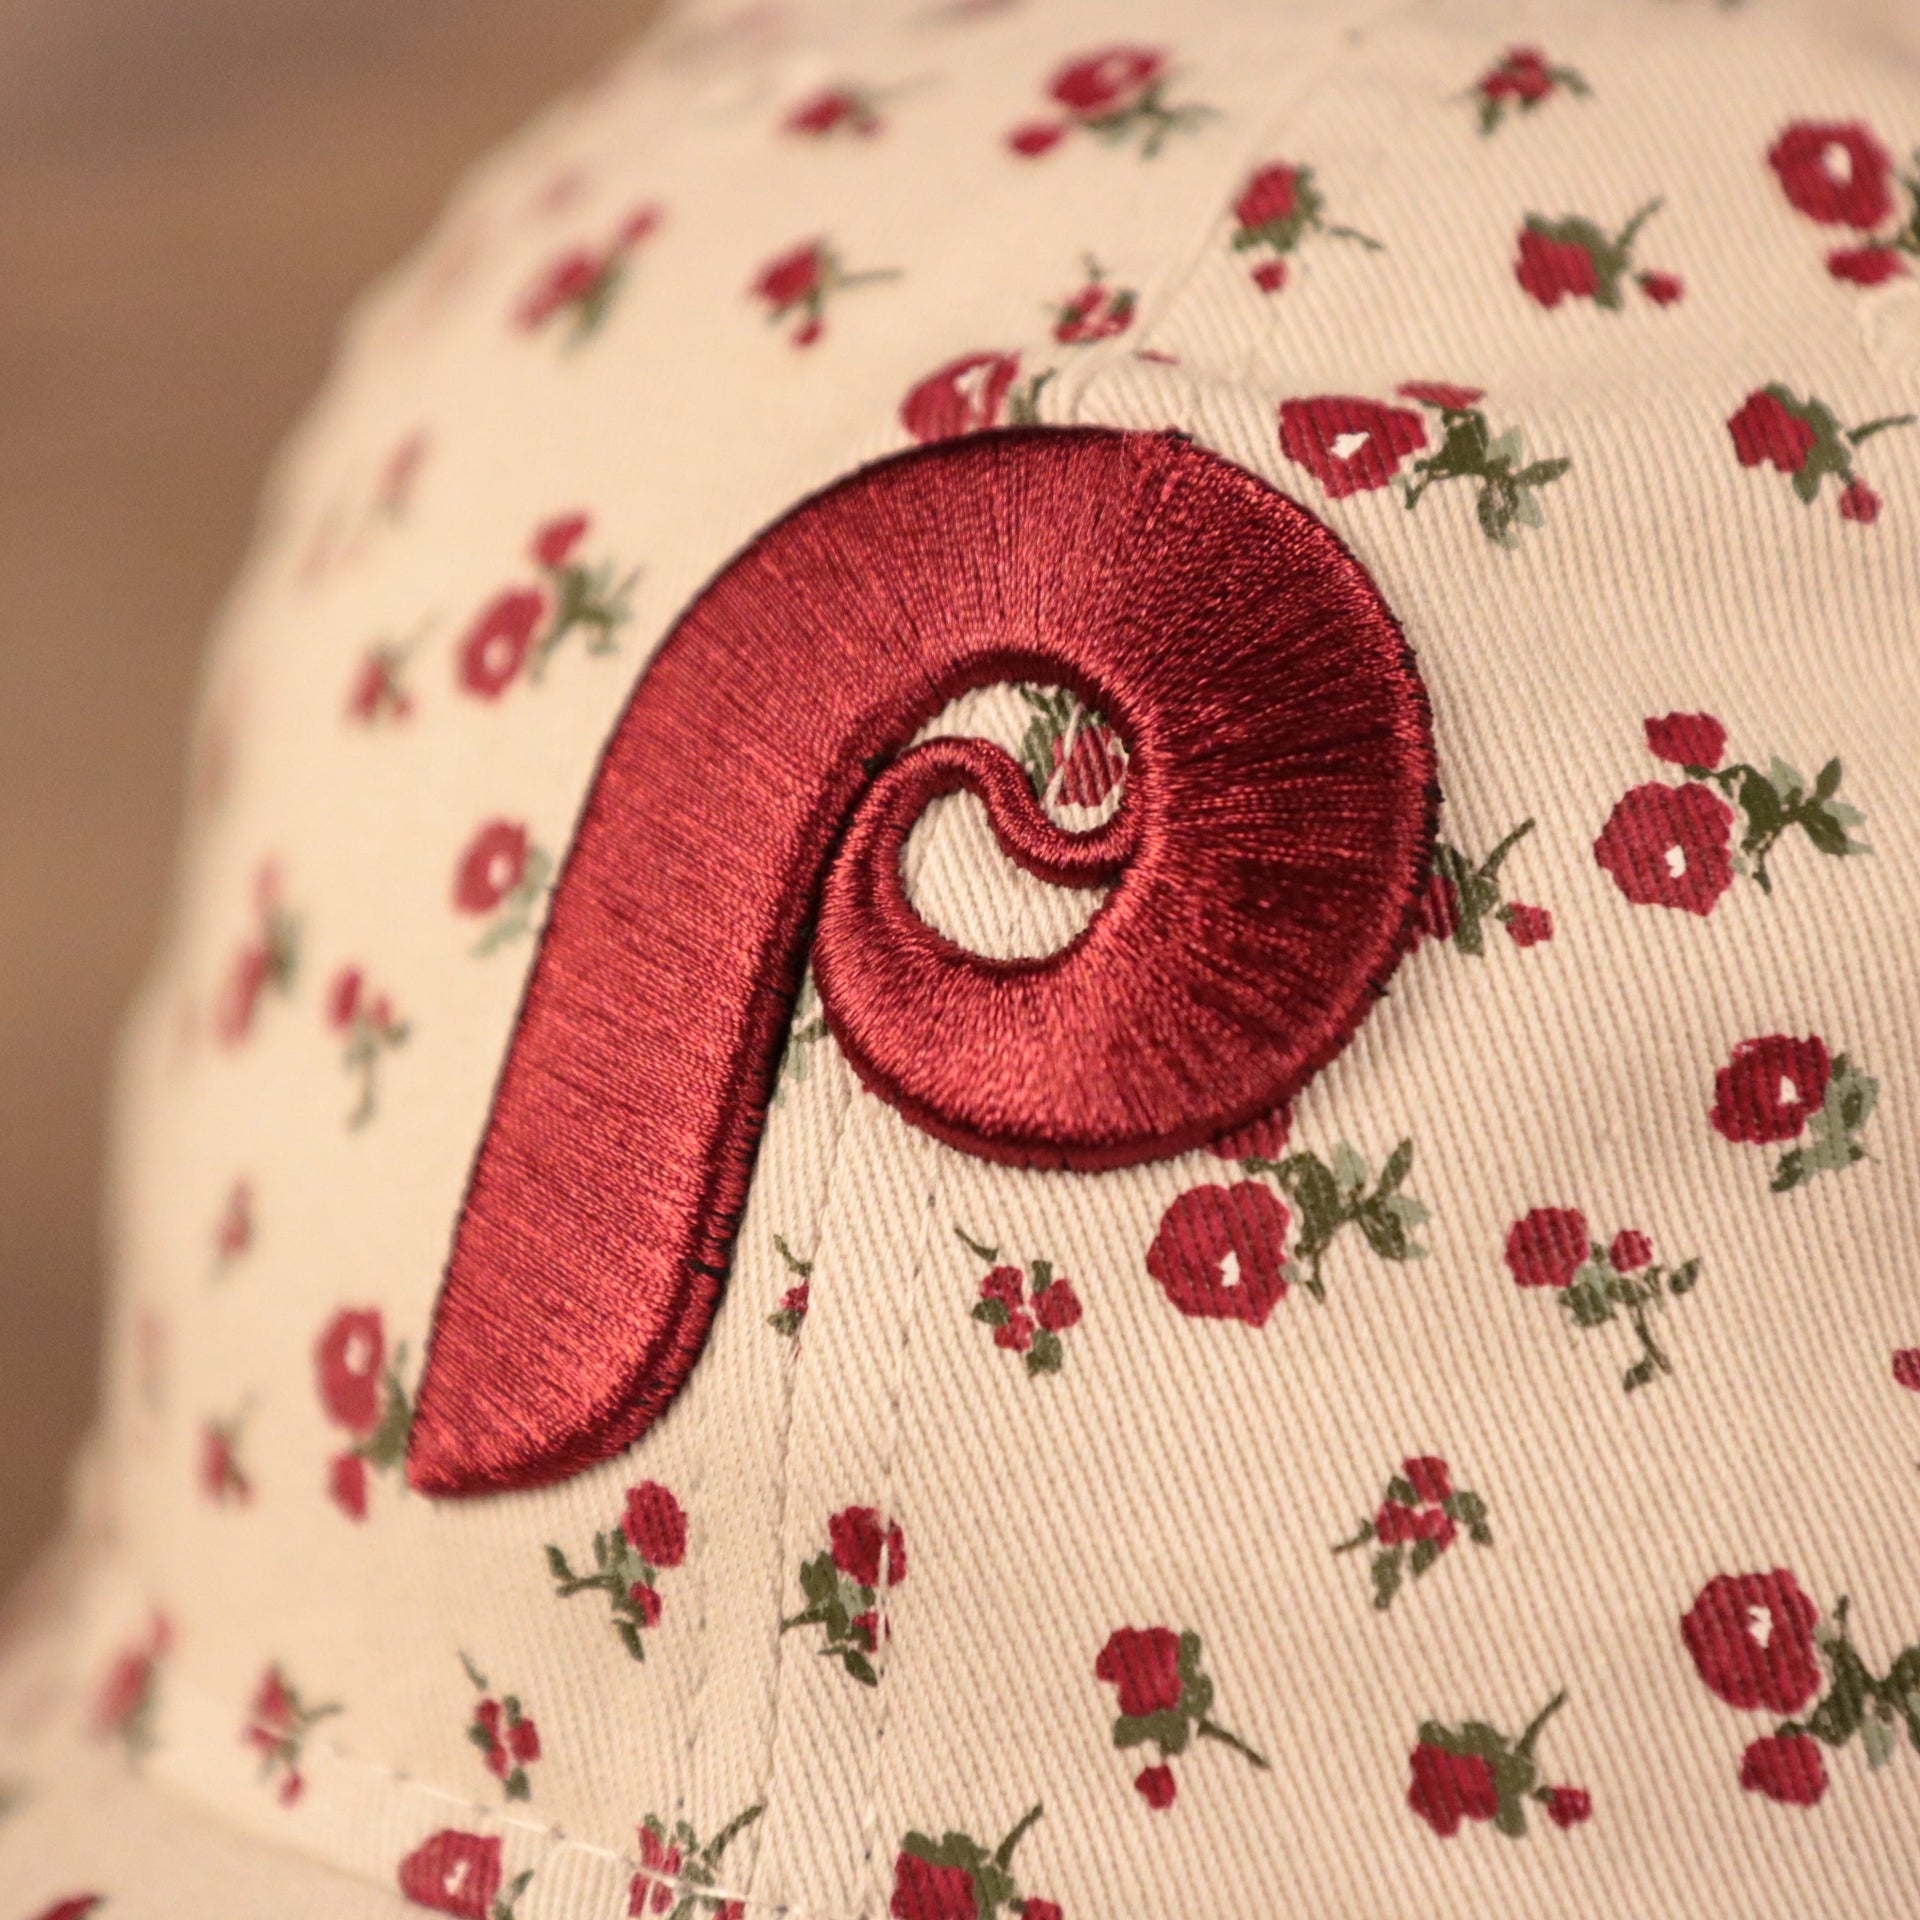 The Philadelphia Phillies logo patch on the front side of the New Era floral baseball cap.